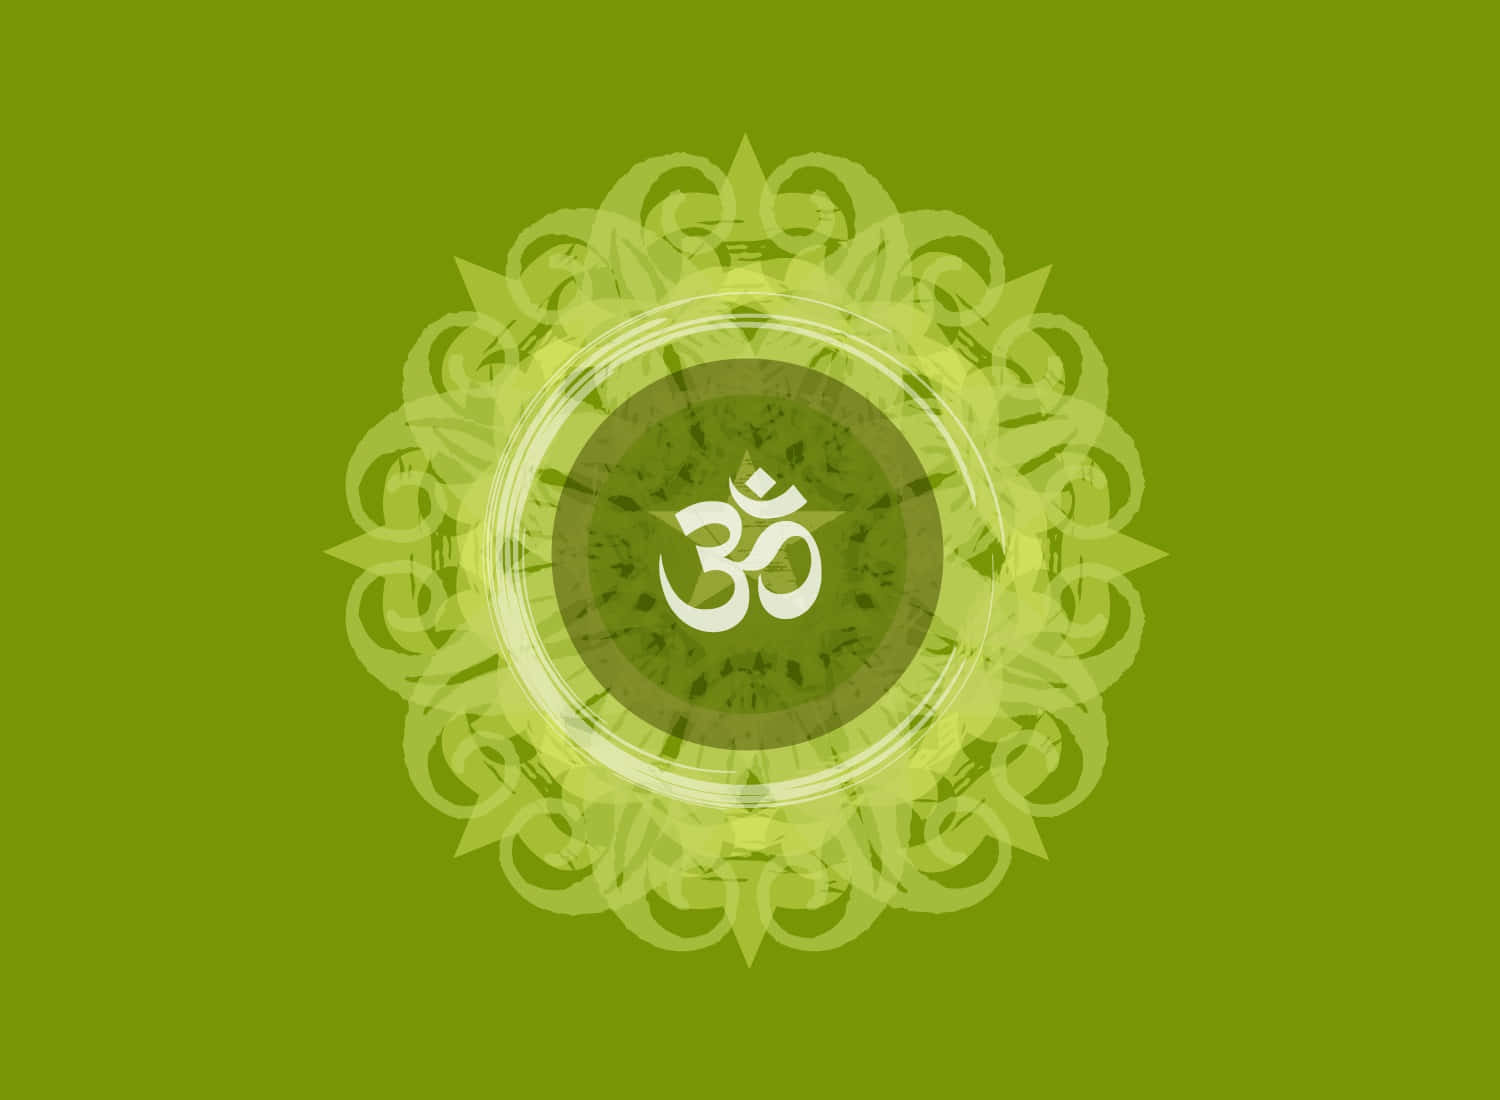 Beautiful Om symbol in circle, Just for today let Compassion be your Guide